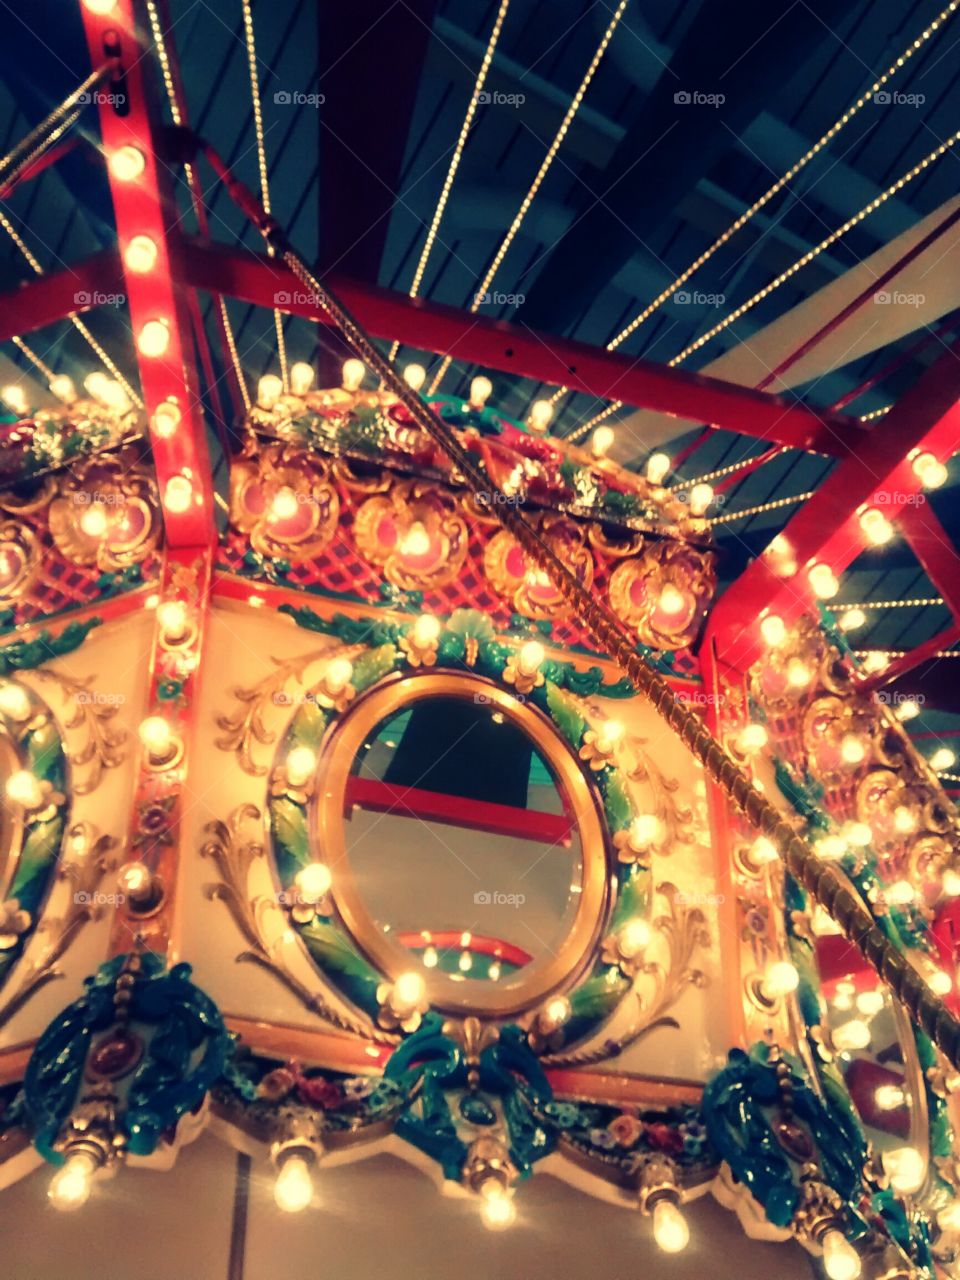 Carousel. This is the mall carousel in my town. Riding one day so beautiful.